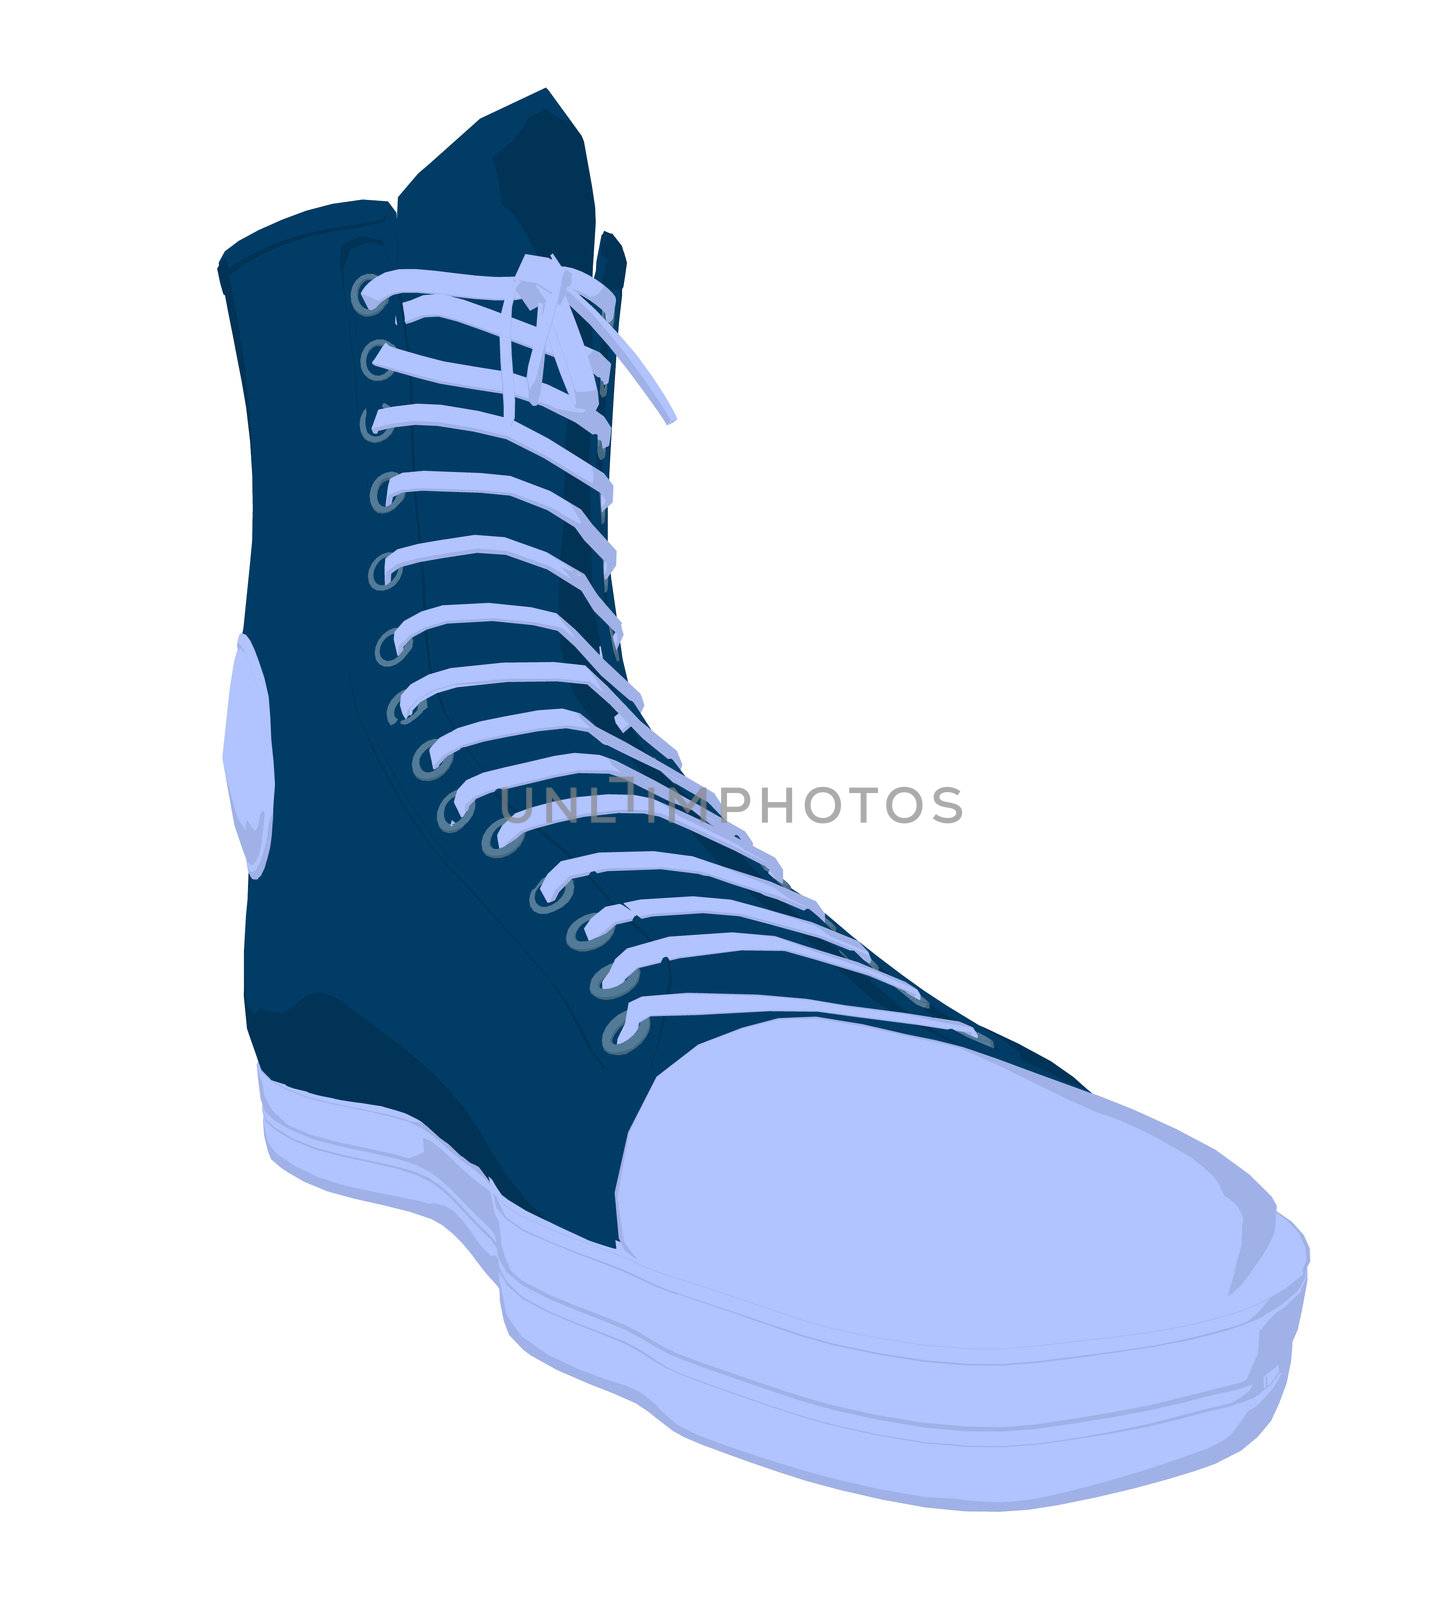 Basketball sneakers on a white background